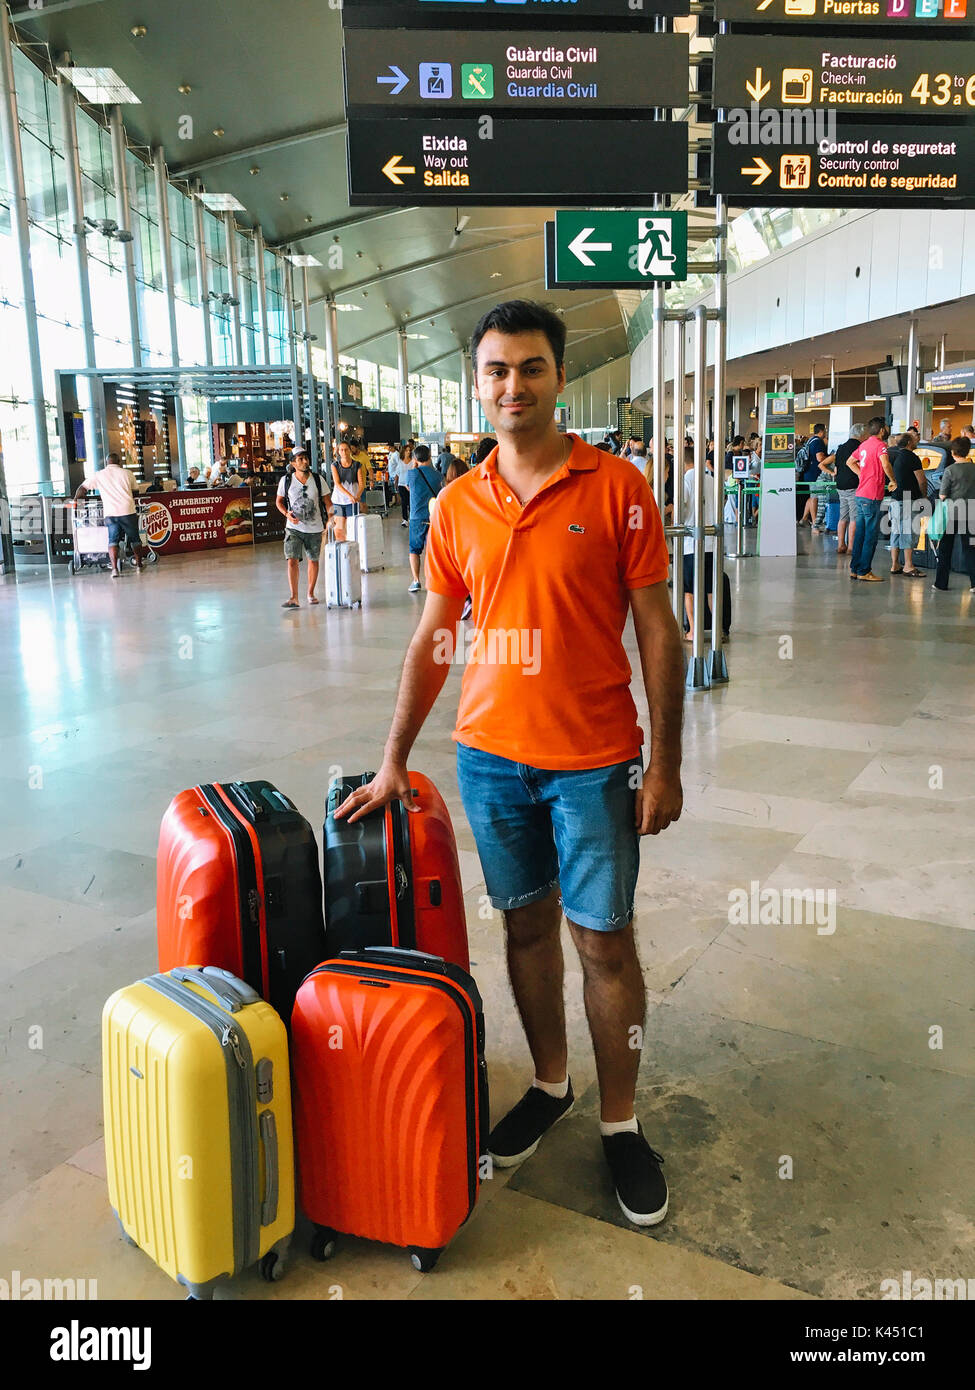 VALENCIA, SPAIN - AUGUST 06, 2016: Man With Many Luggage Bags Is Waiting For Airplane In Airport Terminal. Stock Photo